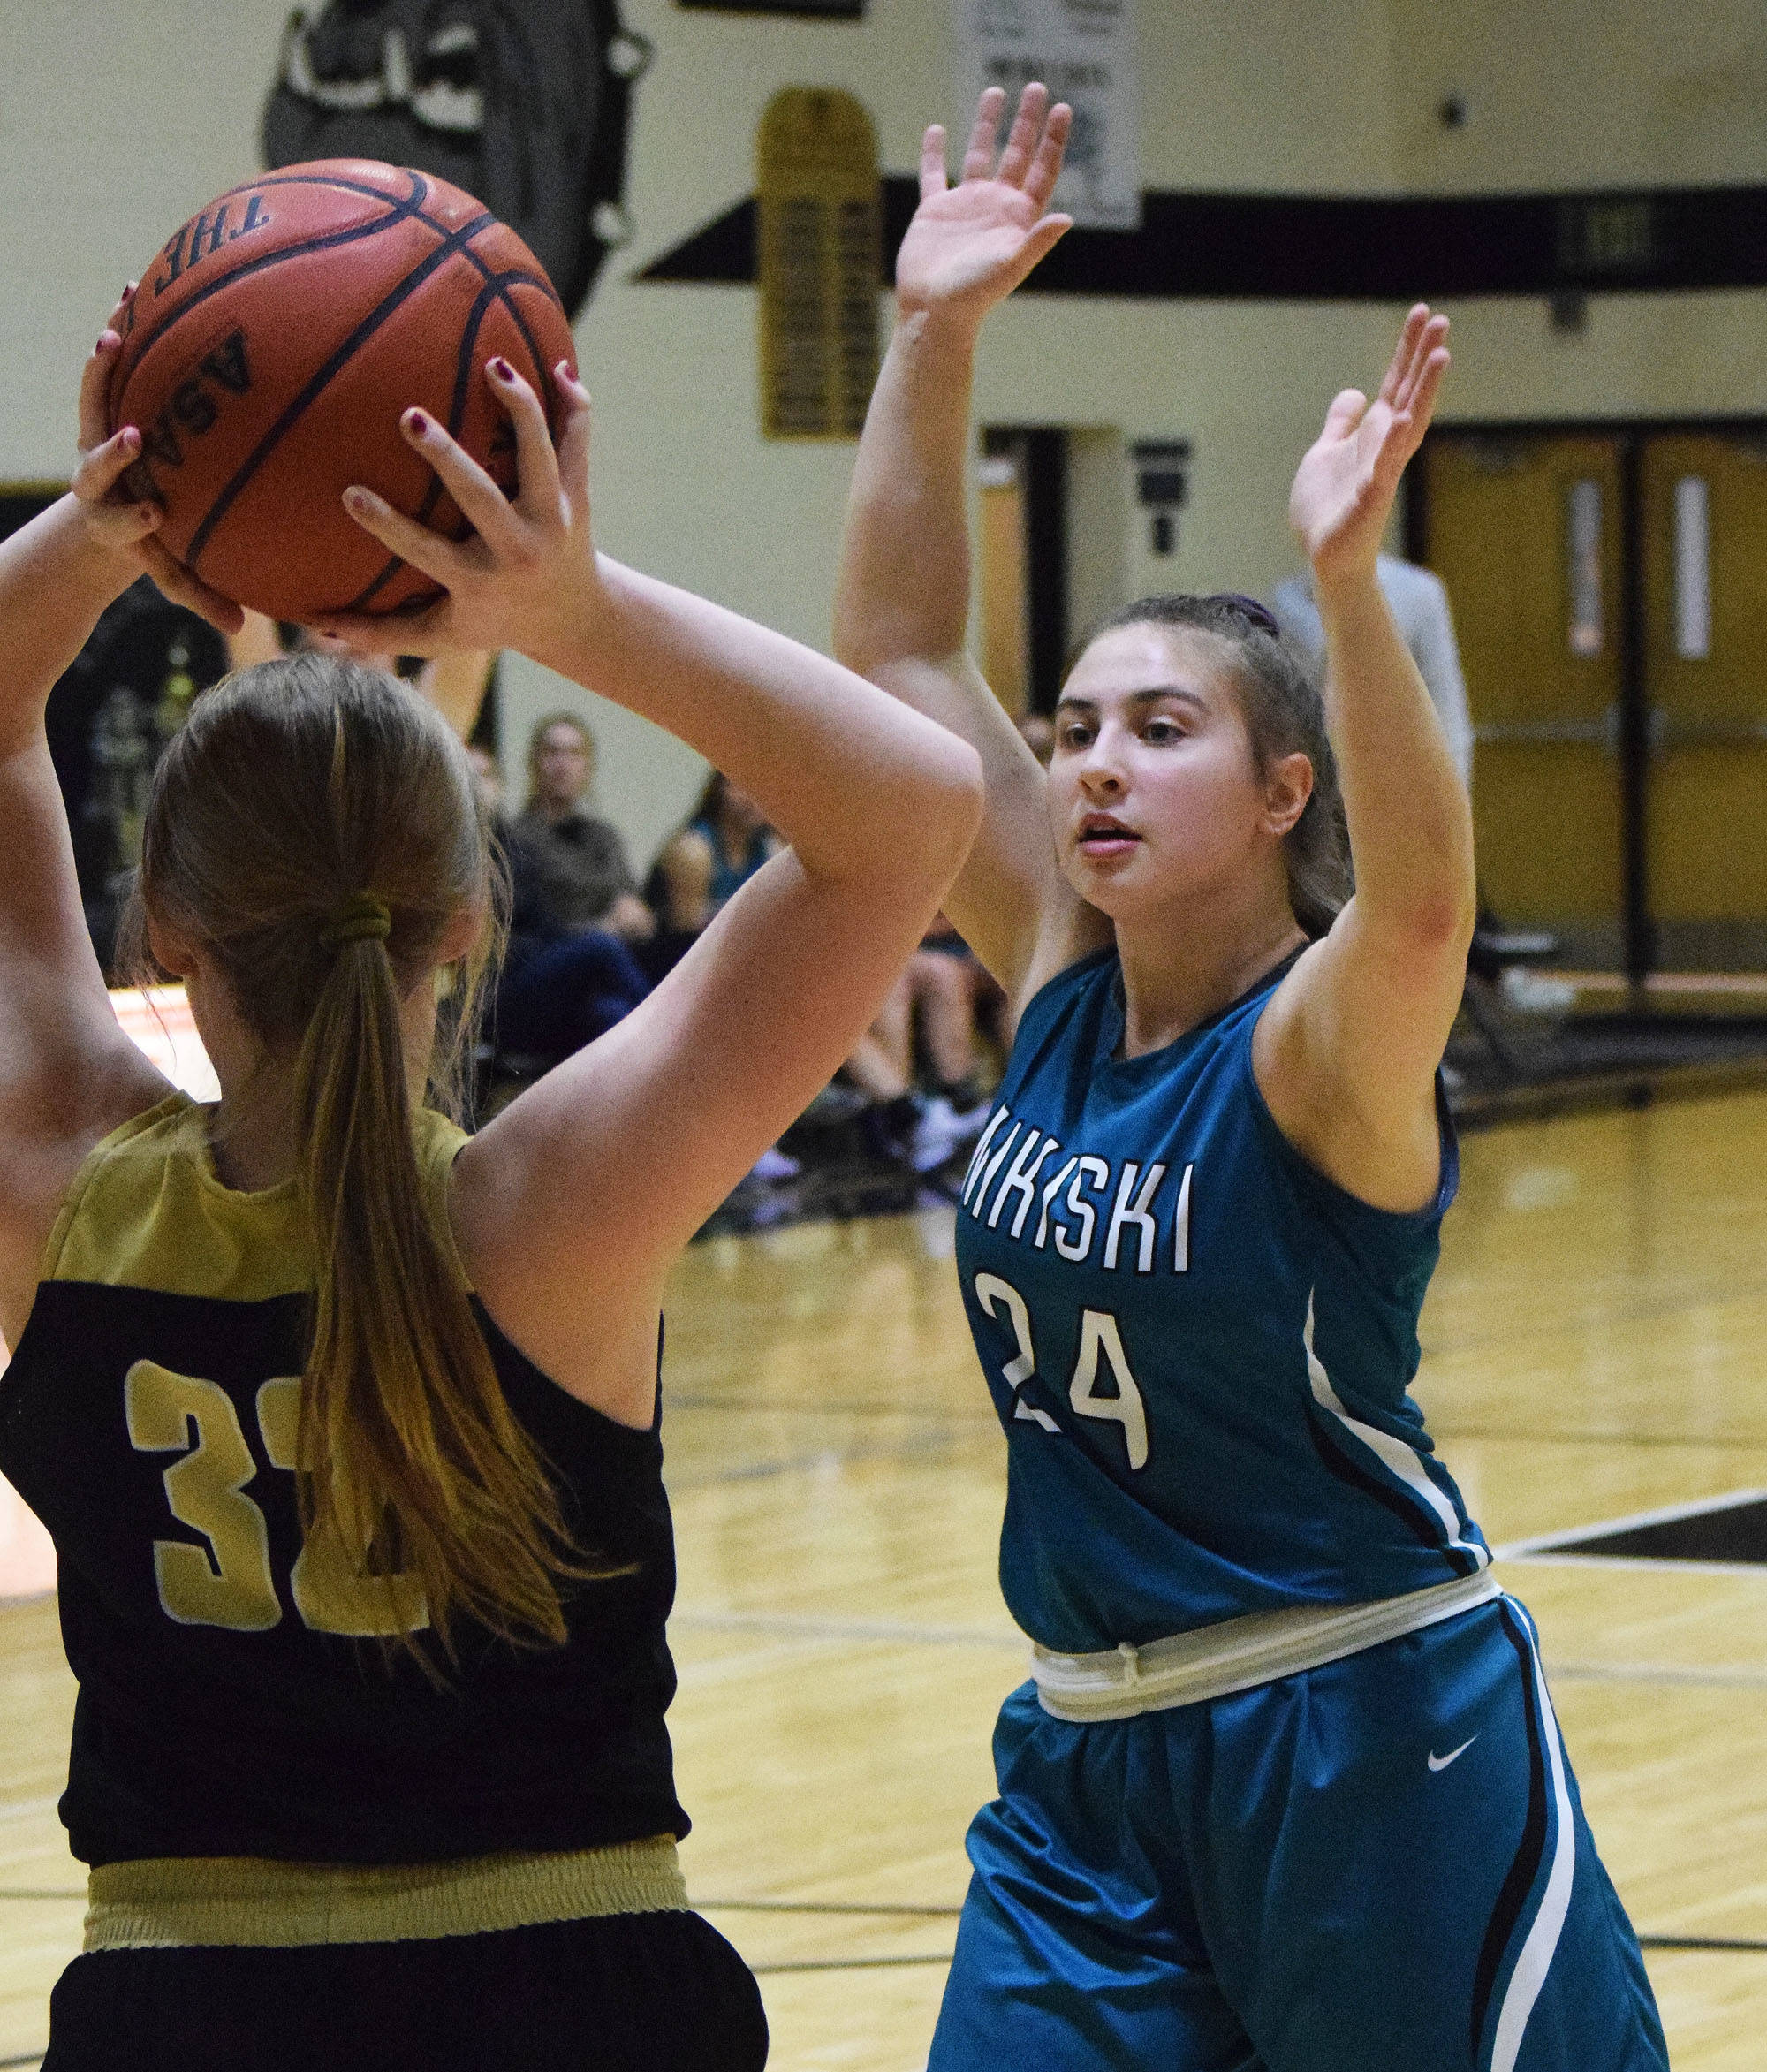 Nikiski’s Kelsey Clark (24) defends an inbound pass from South’s Lily Weimann Saturday at the Rus Hitchcock Nikiski Tip Off tournament. (Photo by Joey Klecka/Peninsula Clarion)